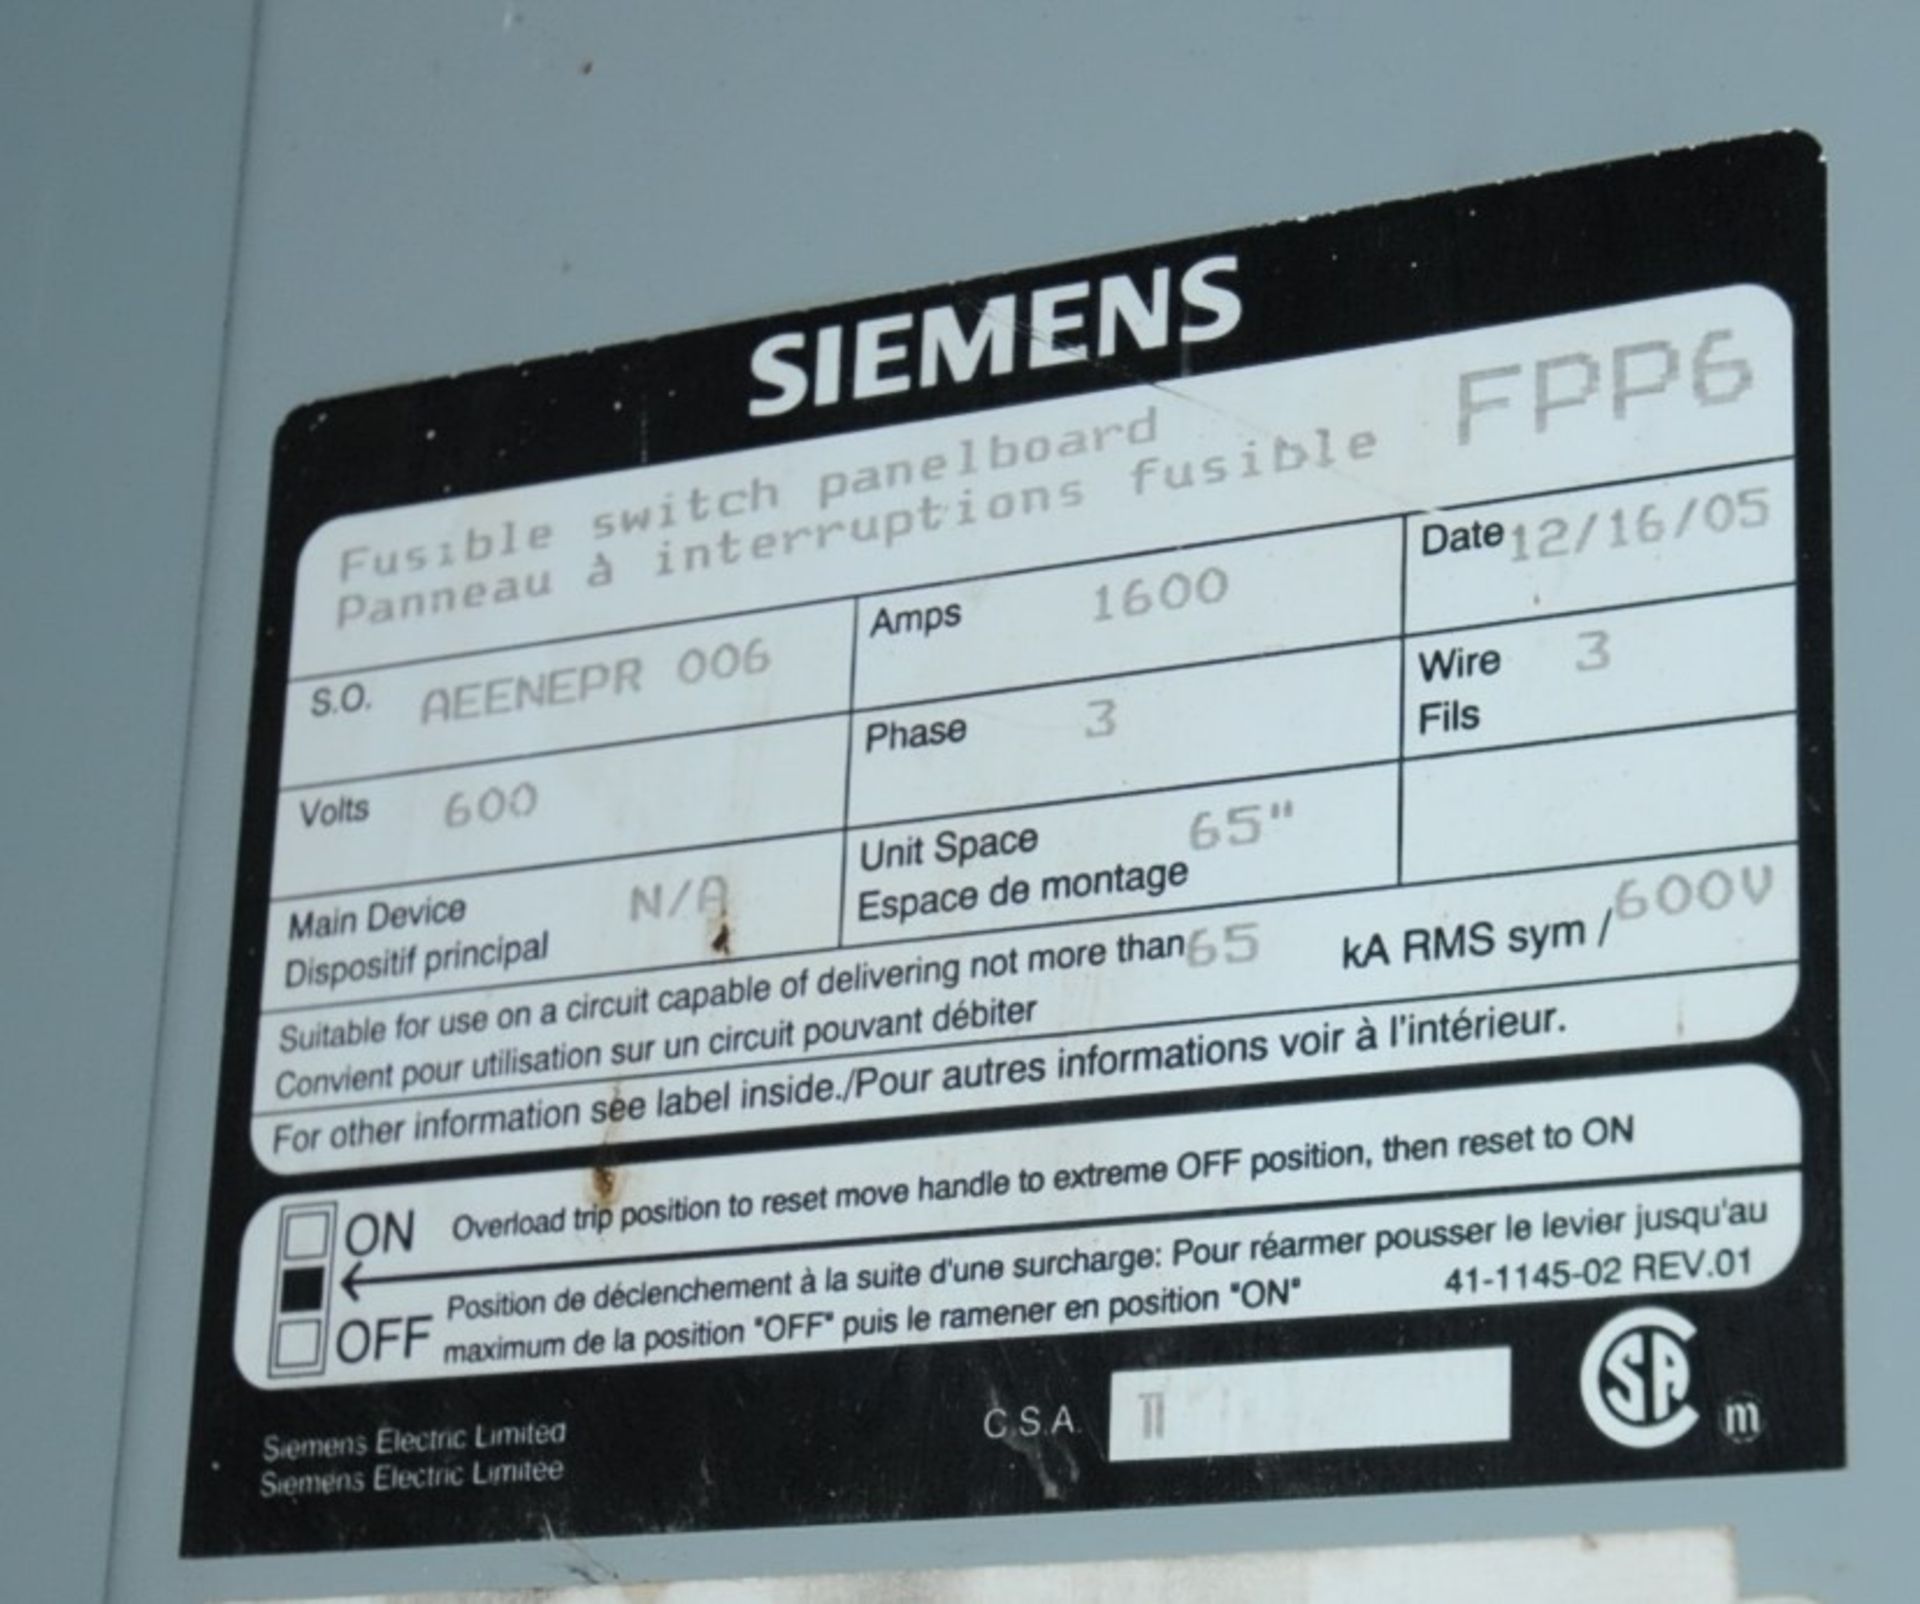 LOT/ (2) SIEMENS (2005) FUSABLE SWITCH PANEL BOARDS (CI) - Image 4 of 4